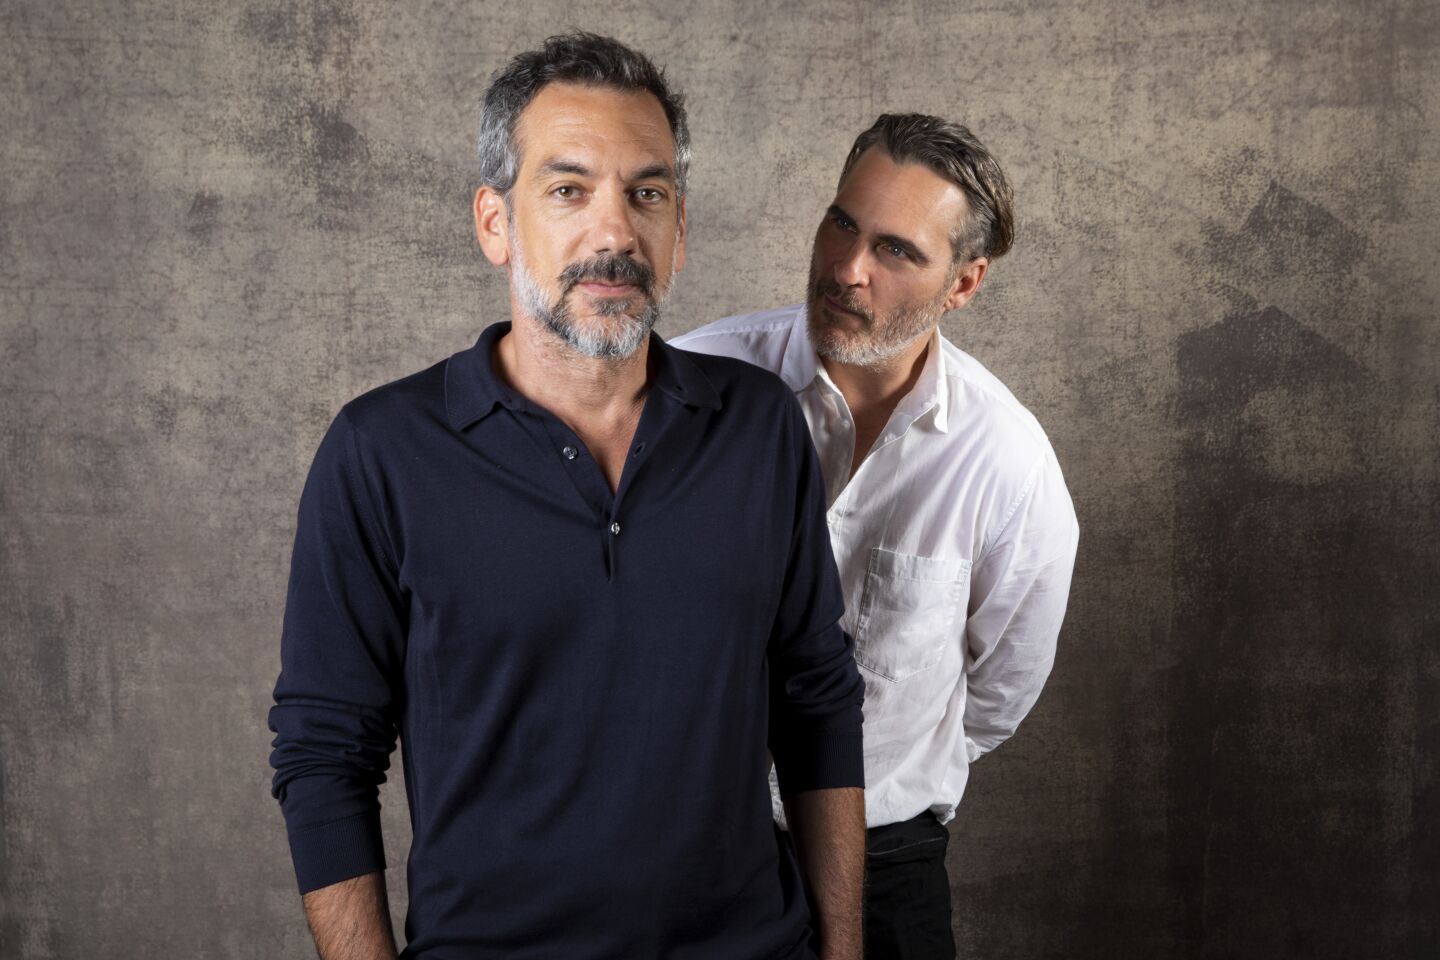 TORONTO, ONT., CAN -- SEPTEMBER 09, 2019-- Director Todd Phillips and actor Joaquin Phoenix, from the film "Joker," photographed in the L.A. Times Photo Studio at the Toronto International Film Festival, in Toronto, Ont., Canada on September 09, 2019. (Jay L. Clendenin / Los Angeles Times)